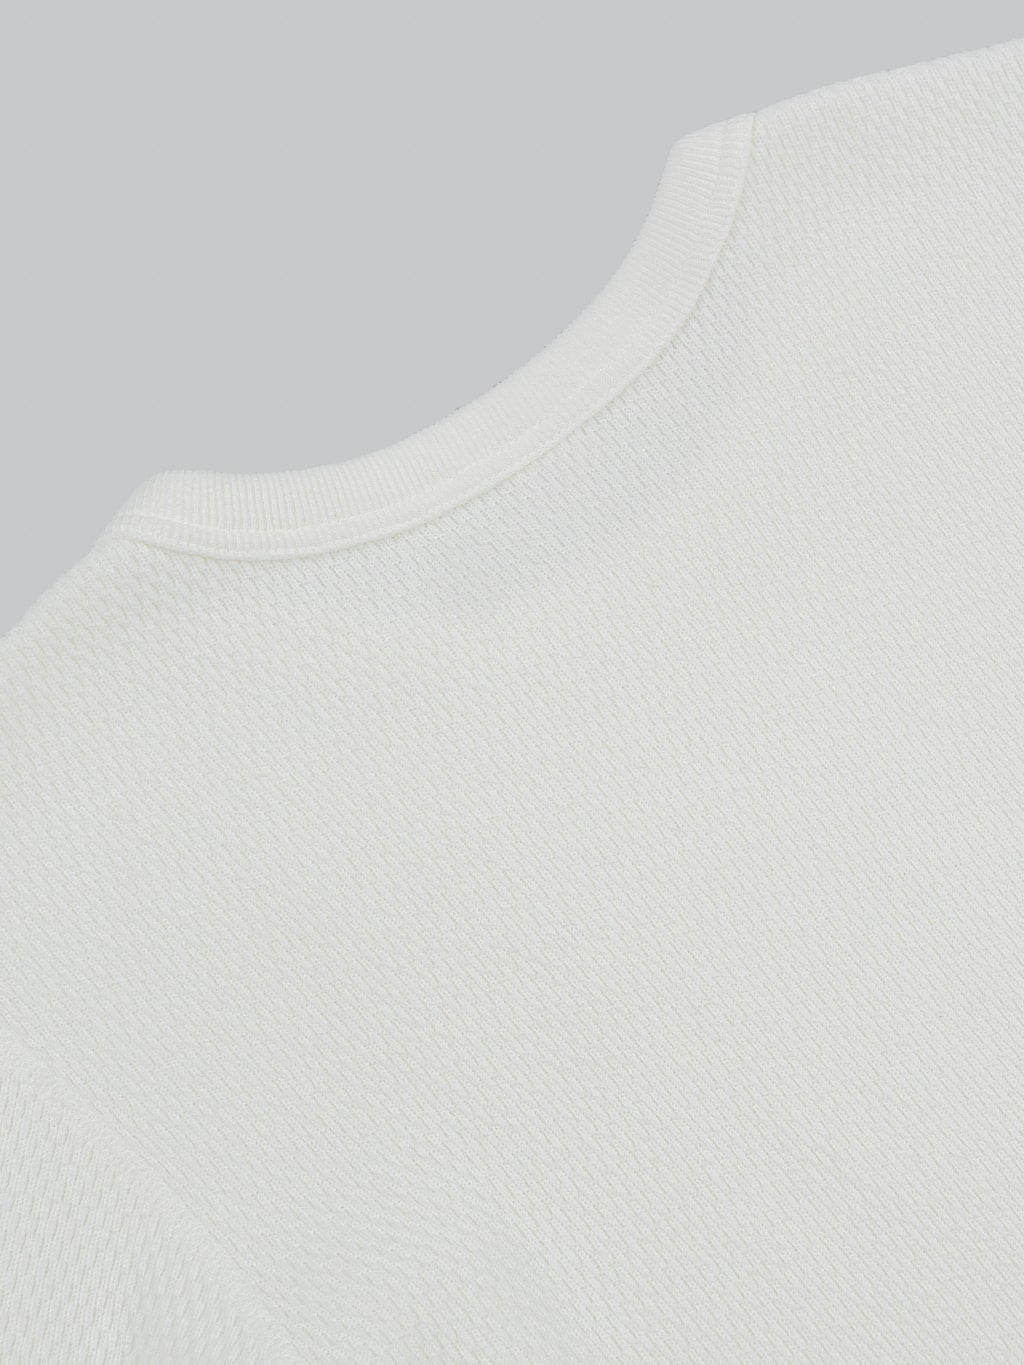 UES Double Honeycomb Thermal tshirt Off White back collar